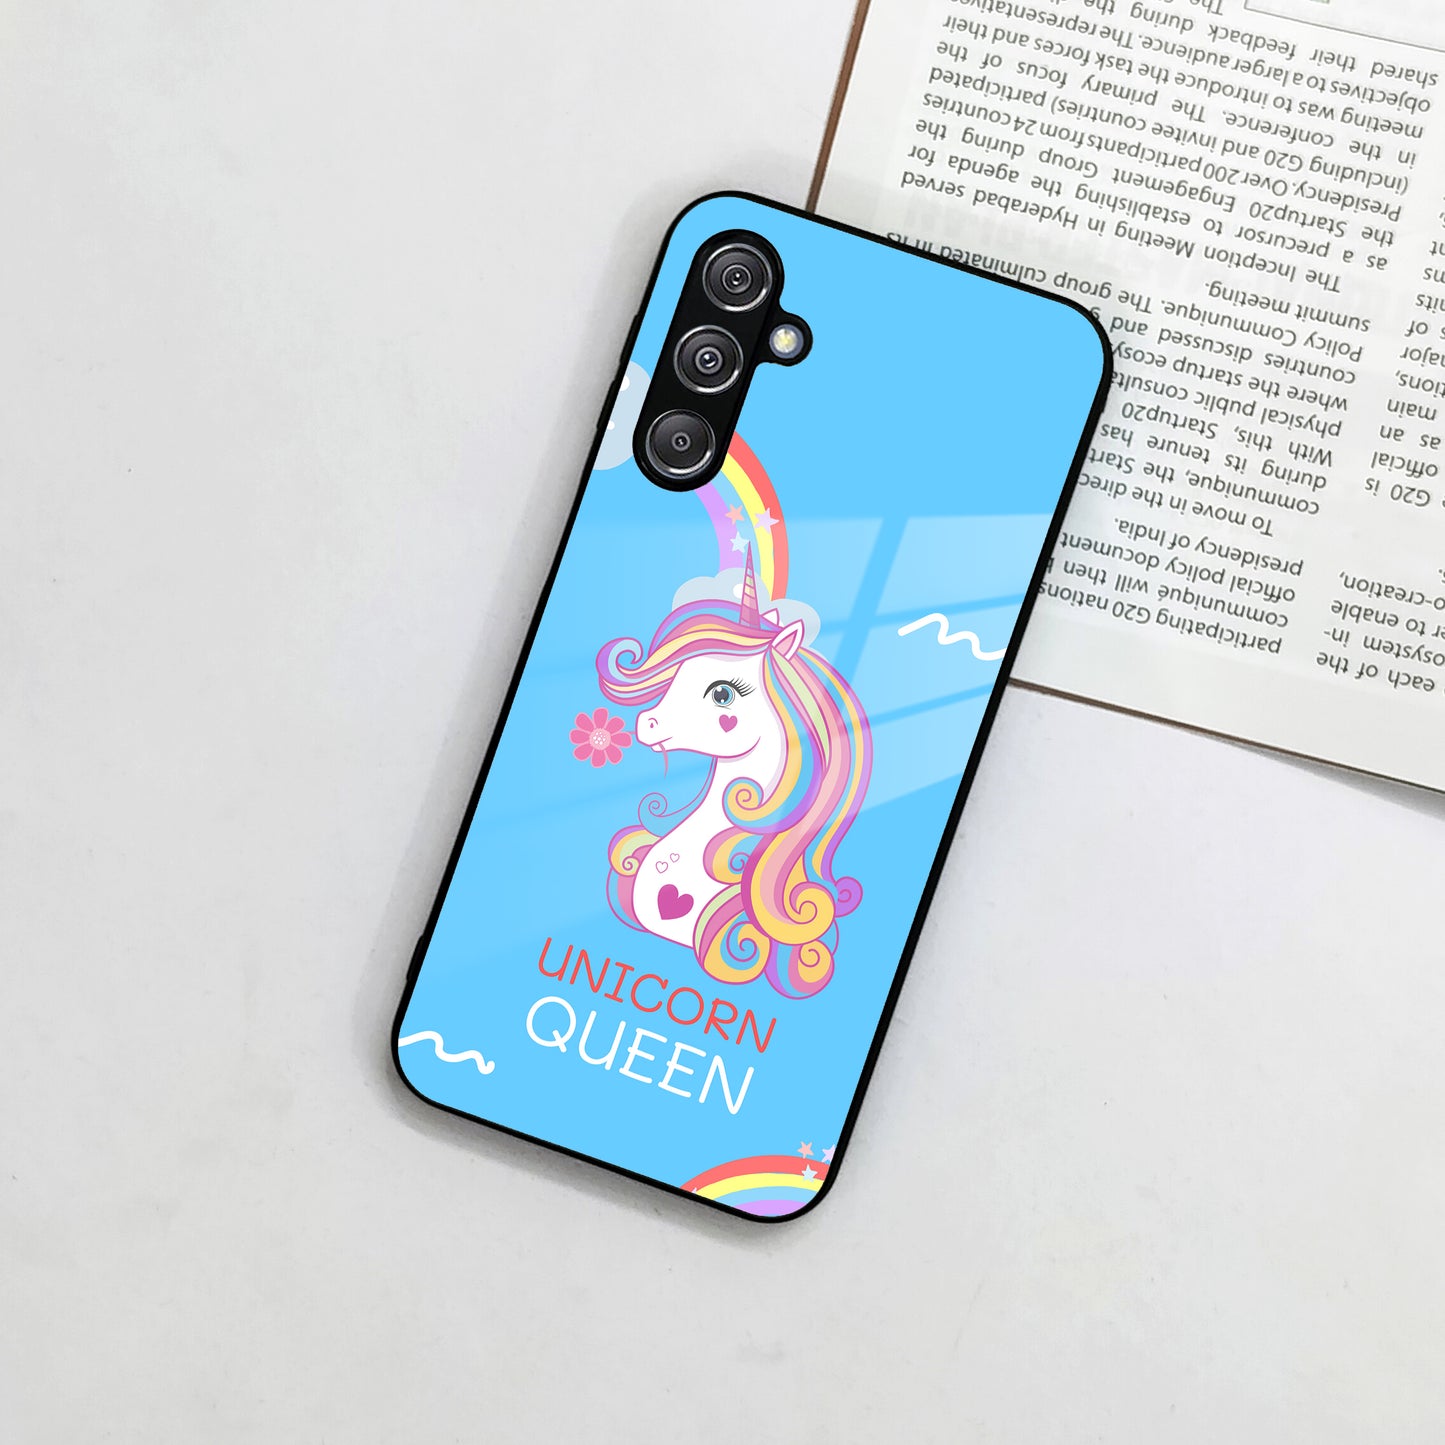 Blue Unicorn Queen Glass Phone Case For Samsung